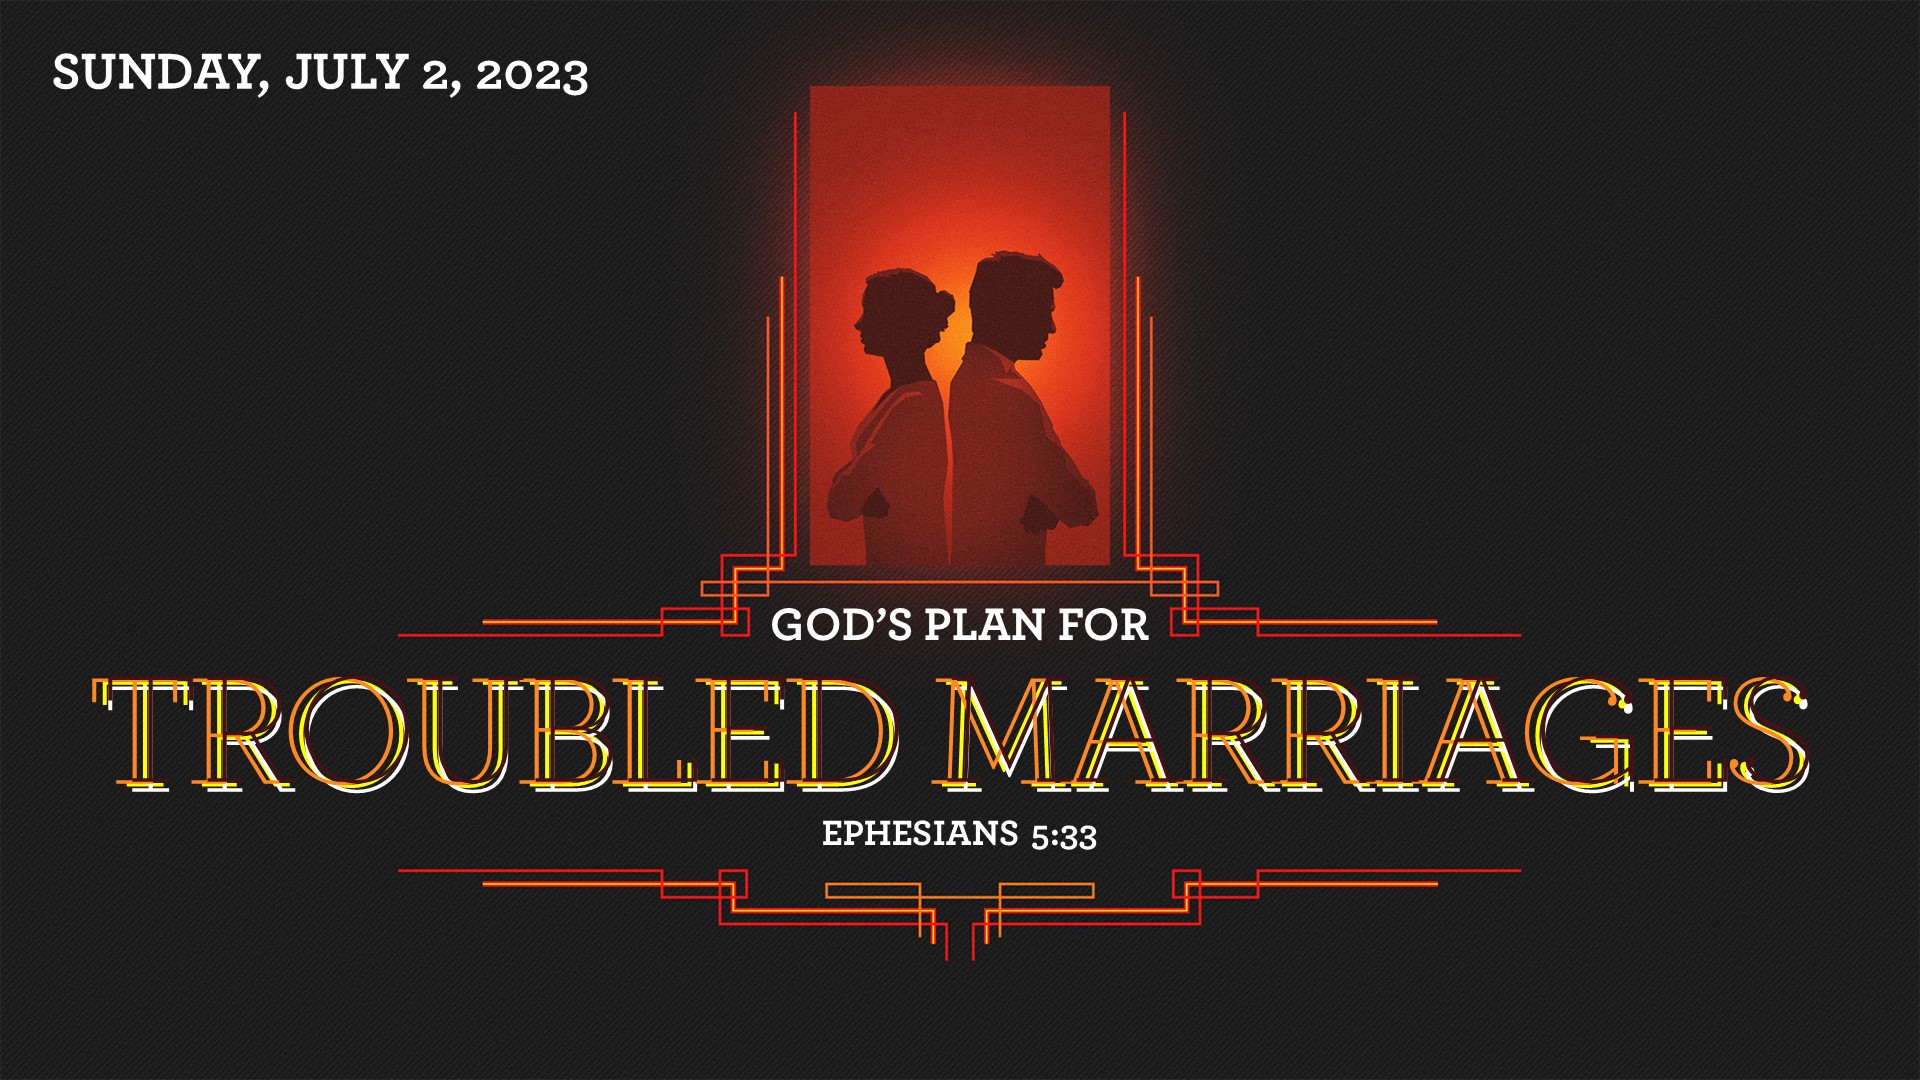 God’s Prescription For Troubled Marriages